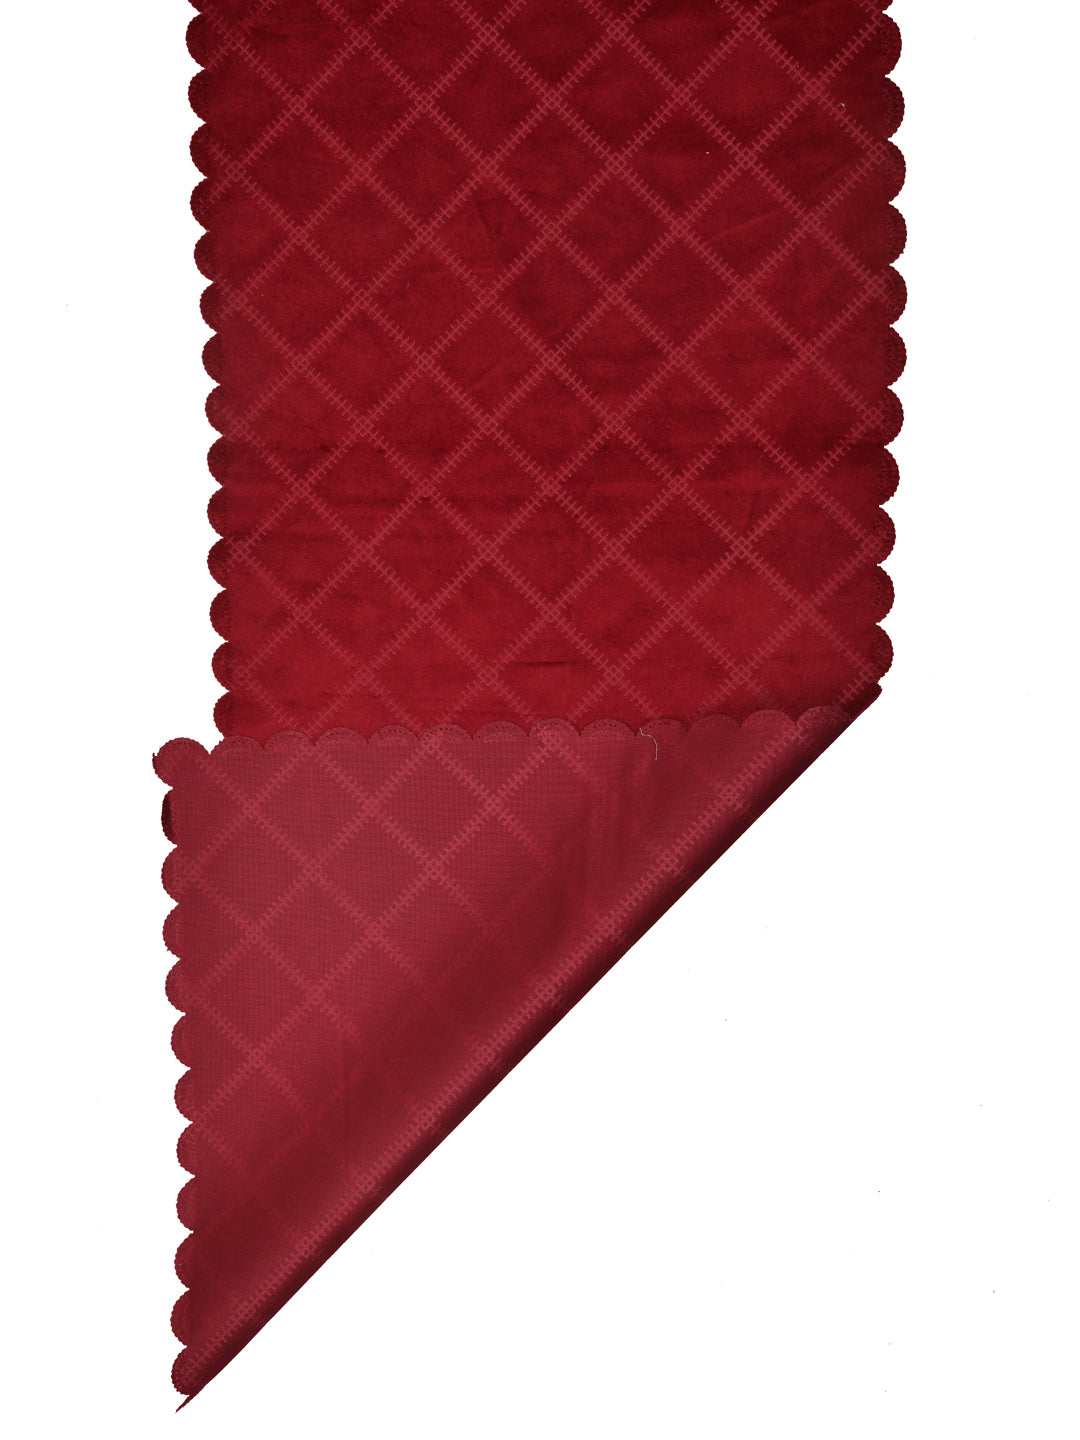 Table Runner; 15x72 Inches; Quilted Maroon